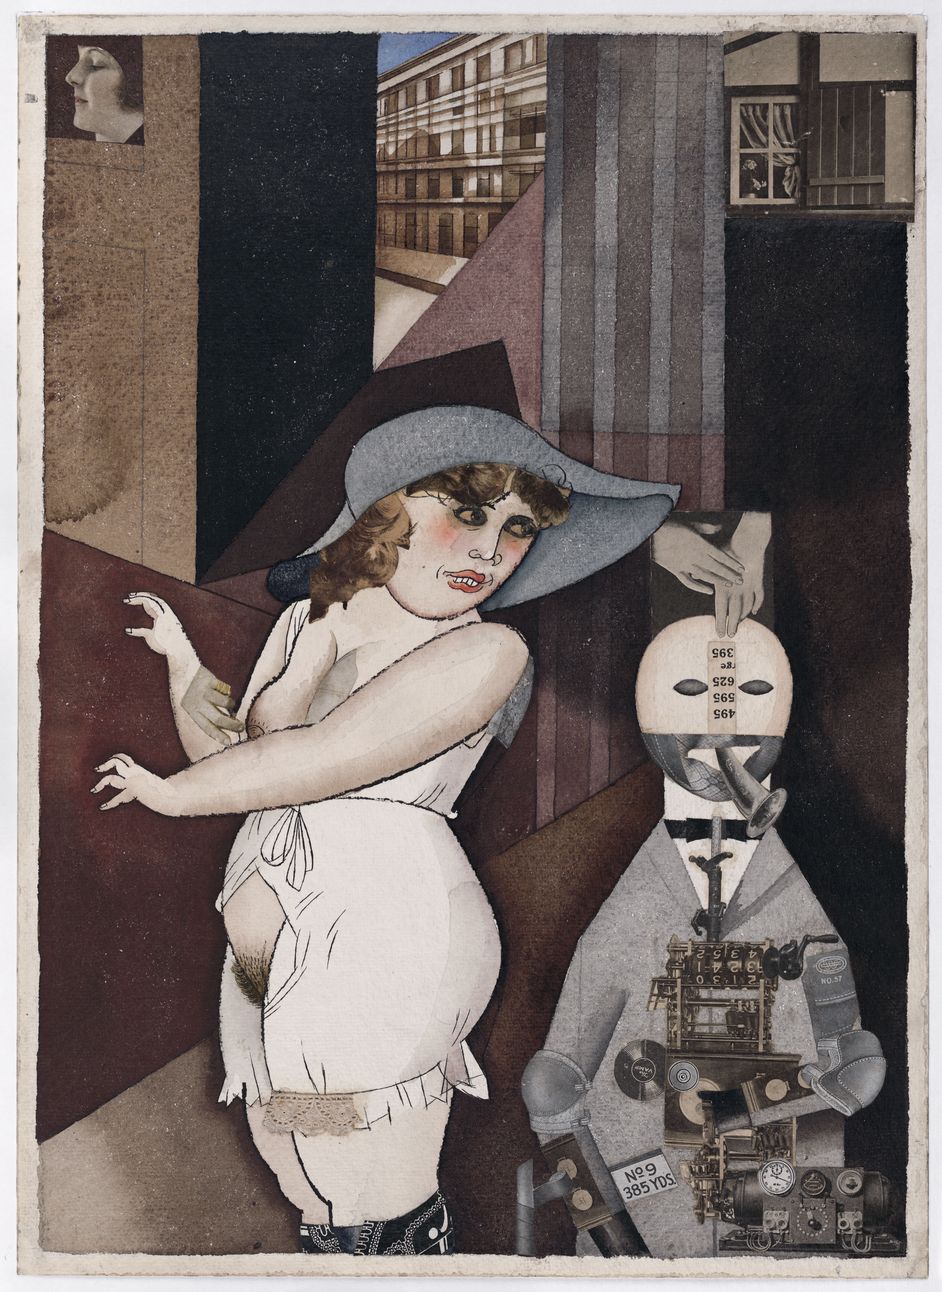 Collage by George Grosz, watercolour, pencil, ink and collage on watercolour cardboard, 42 x 30,2 cm